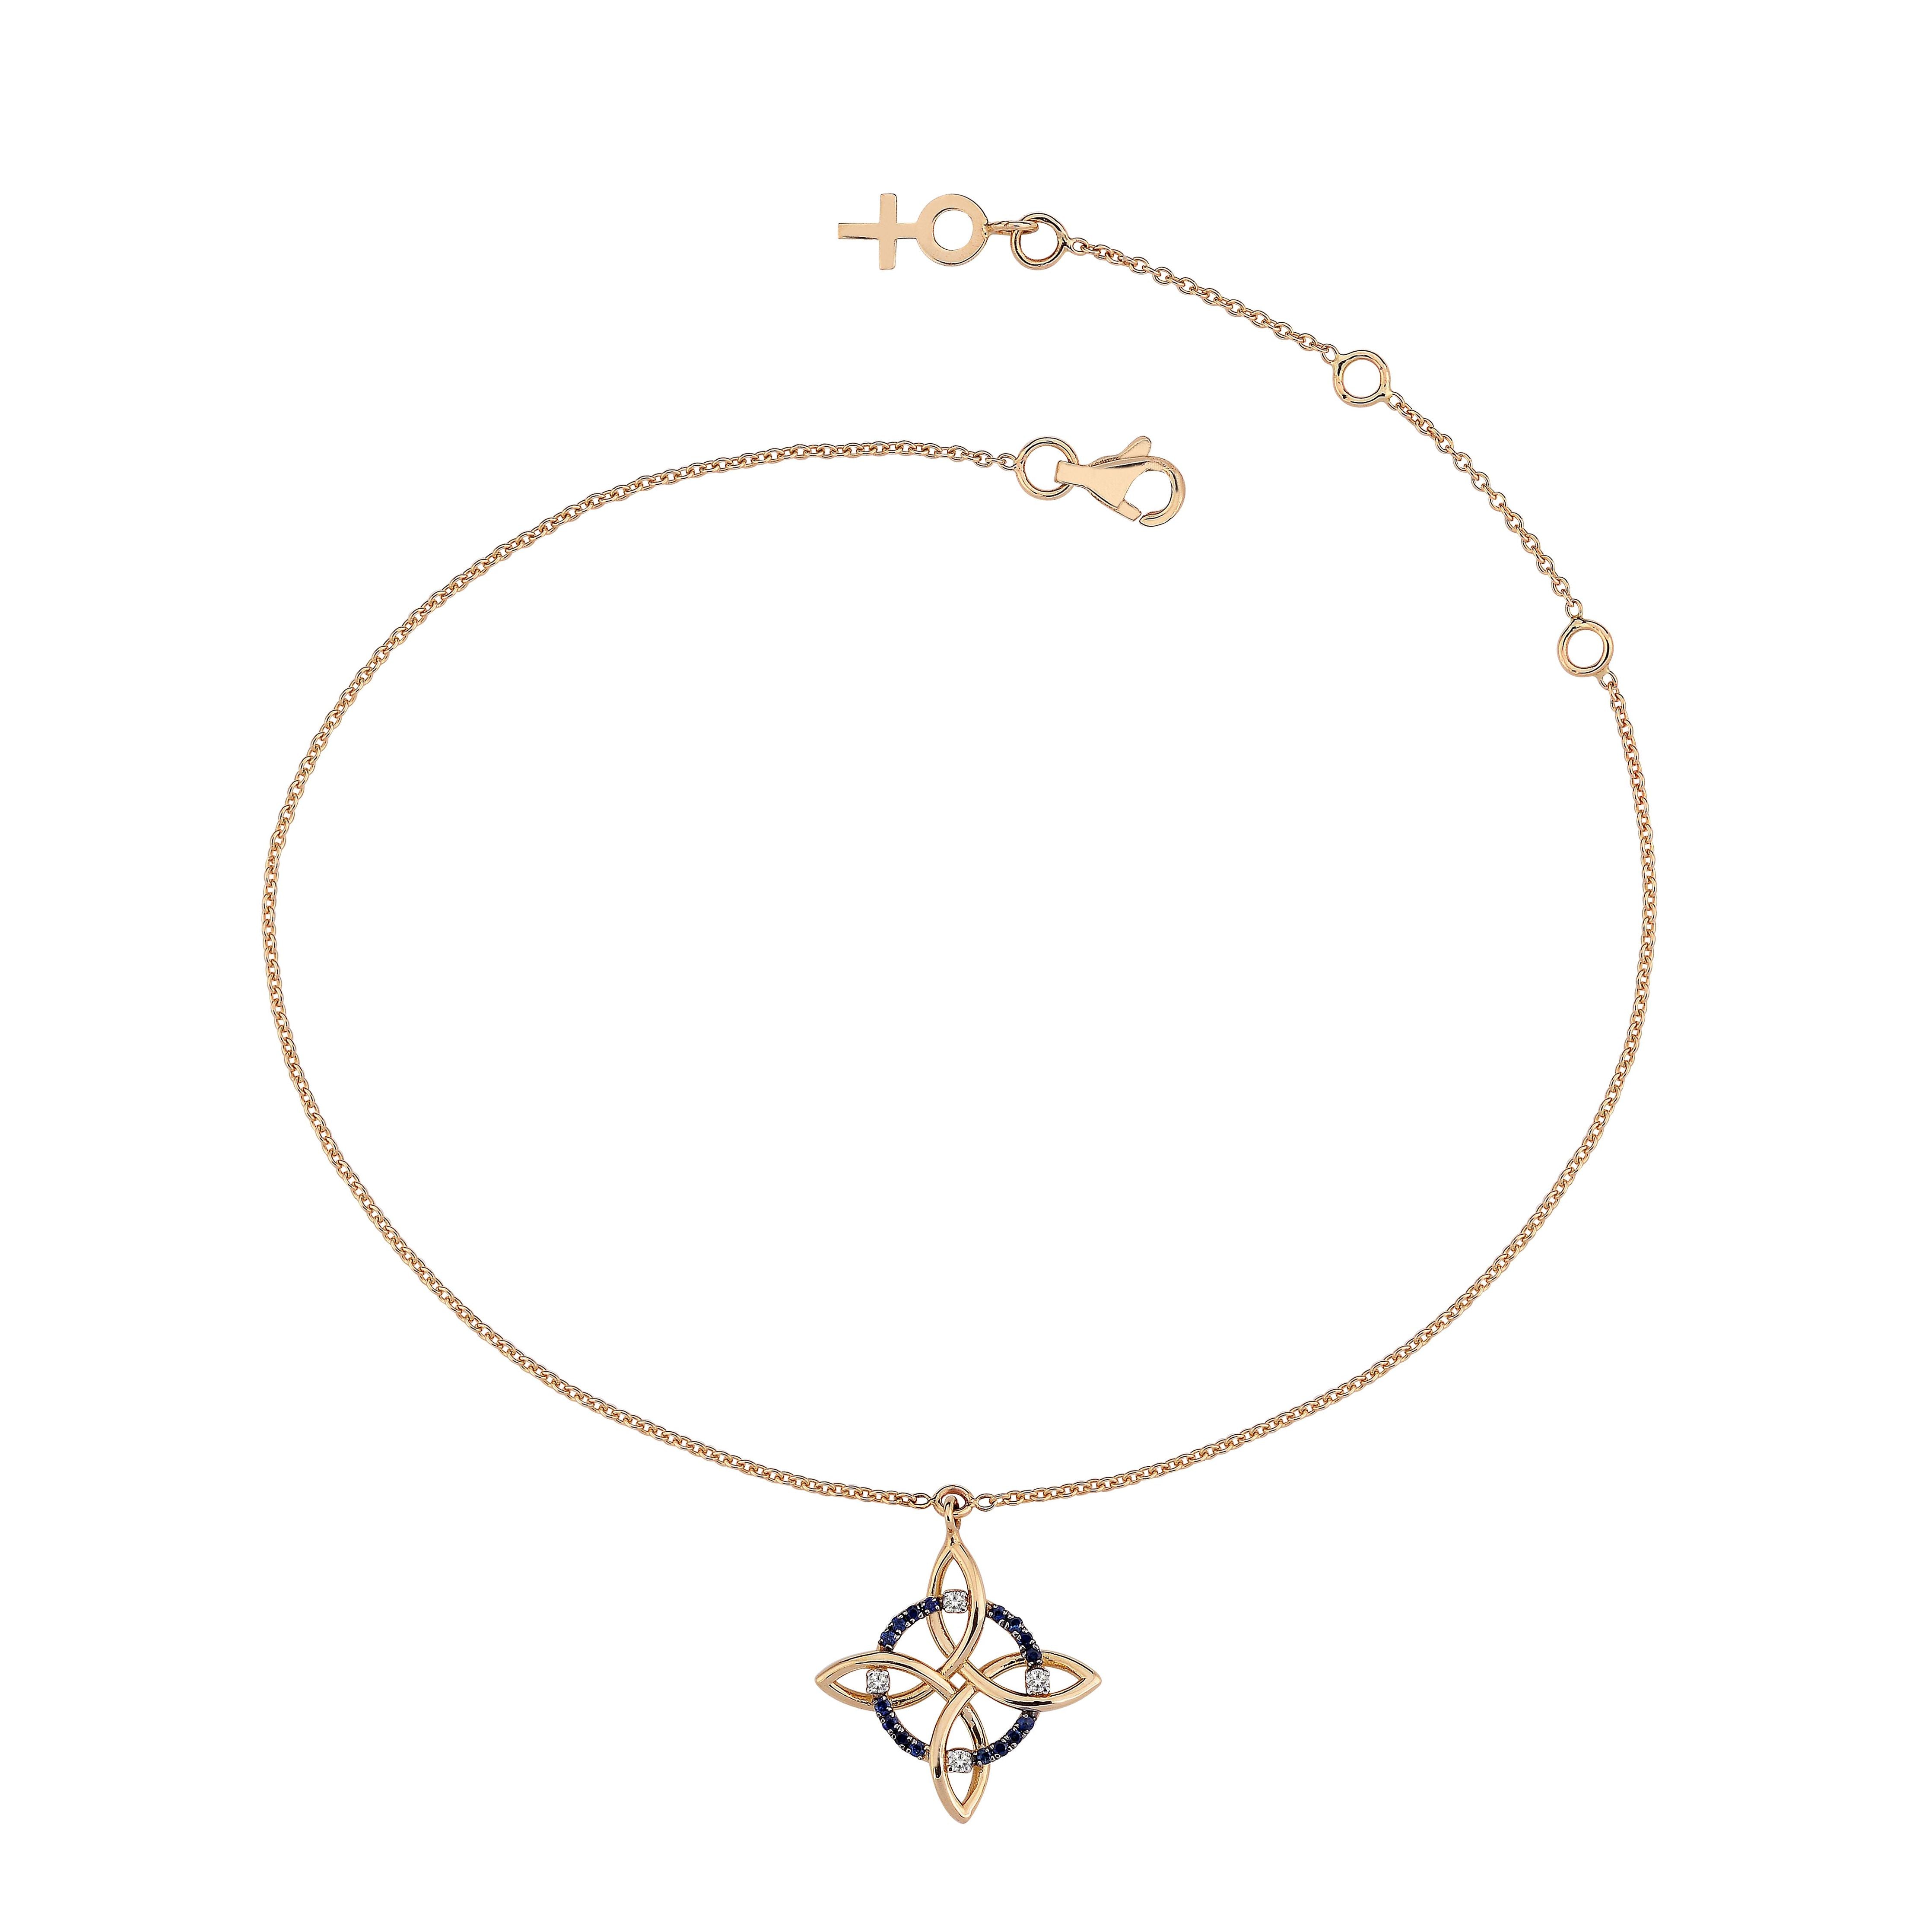 Magic Knot Anklet in Rose Gold - Her Story Shop